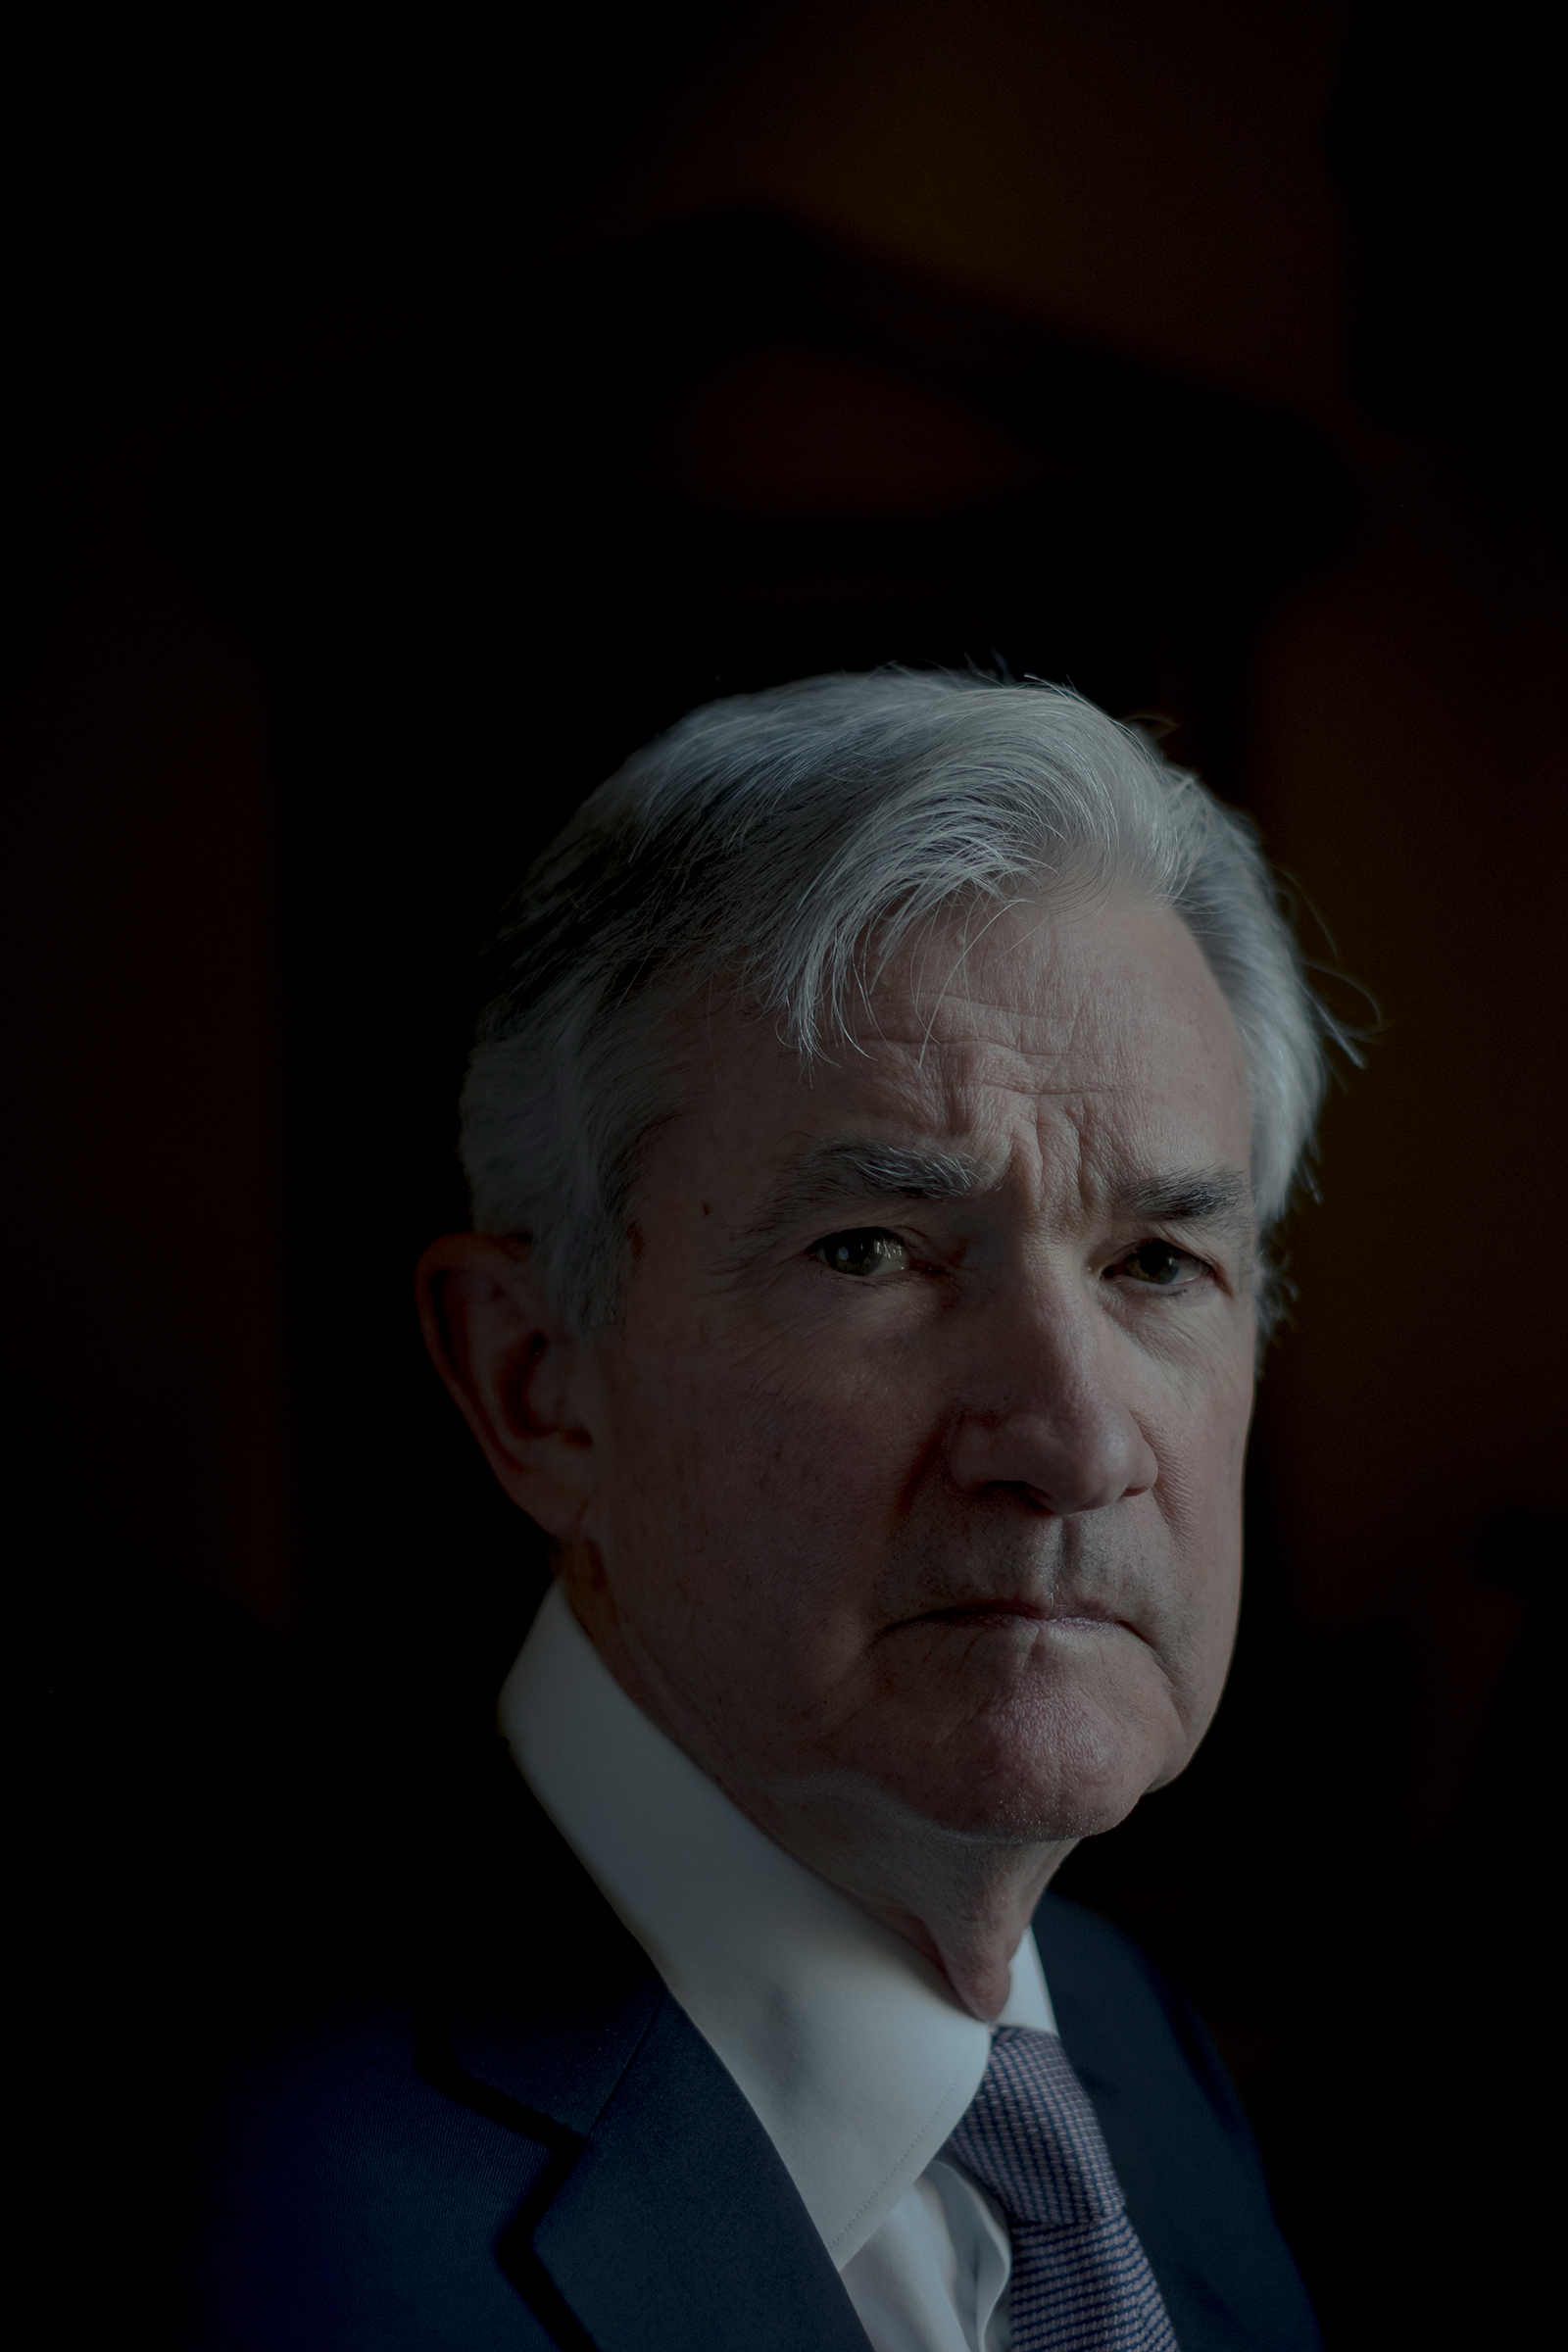 Powell in the boardroom at the Federal Reserve in Washington on May 13